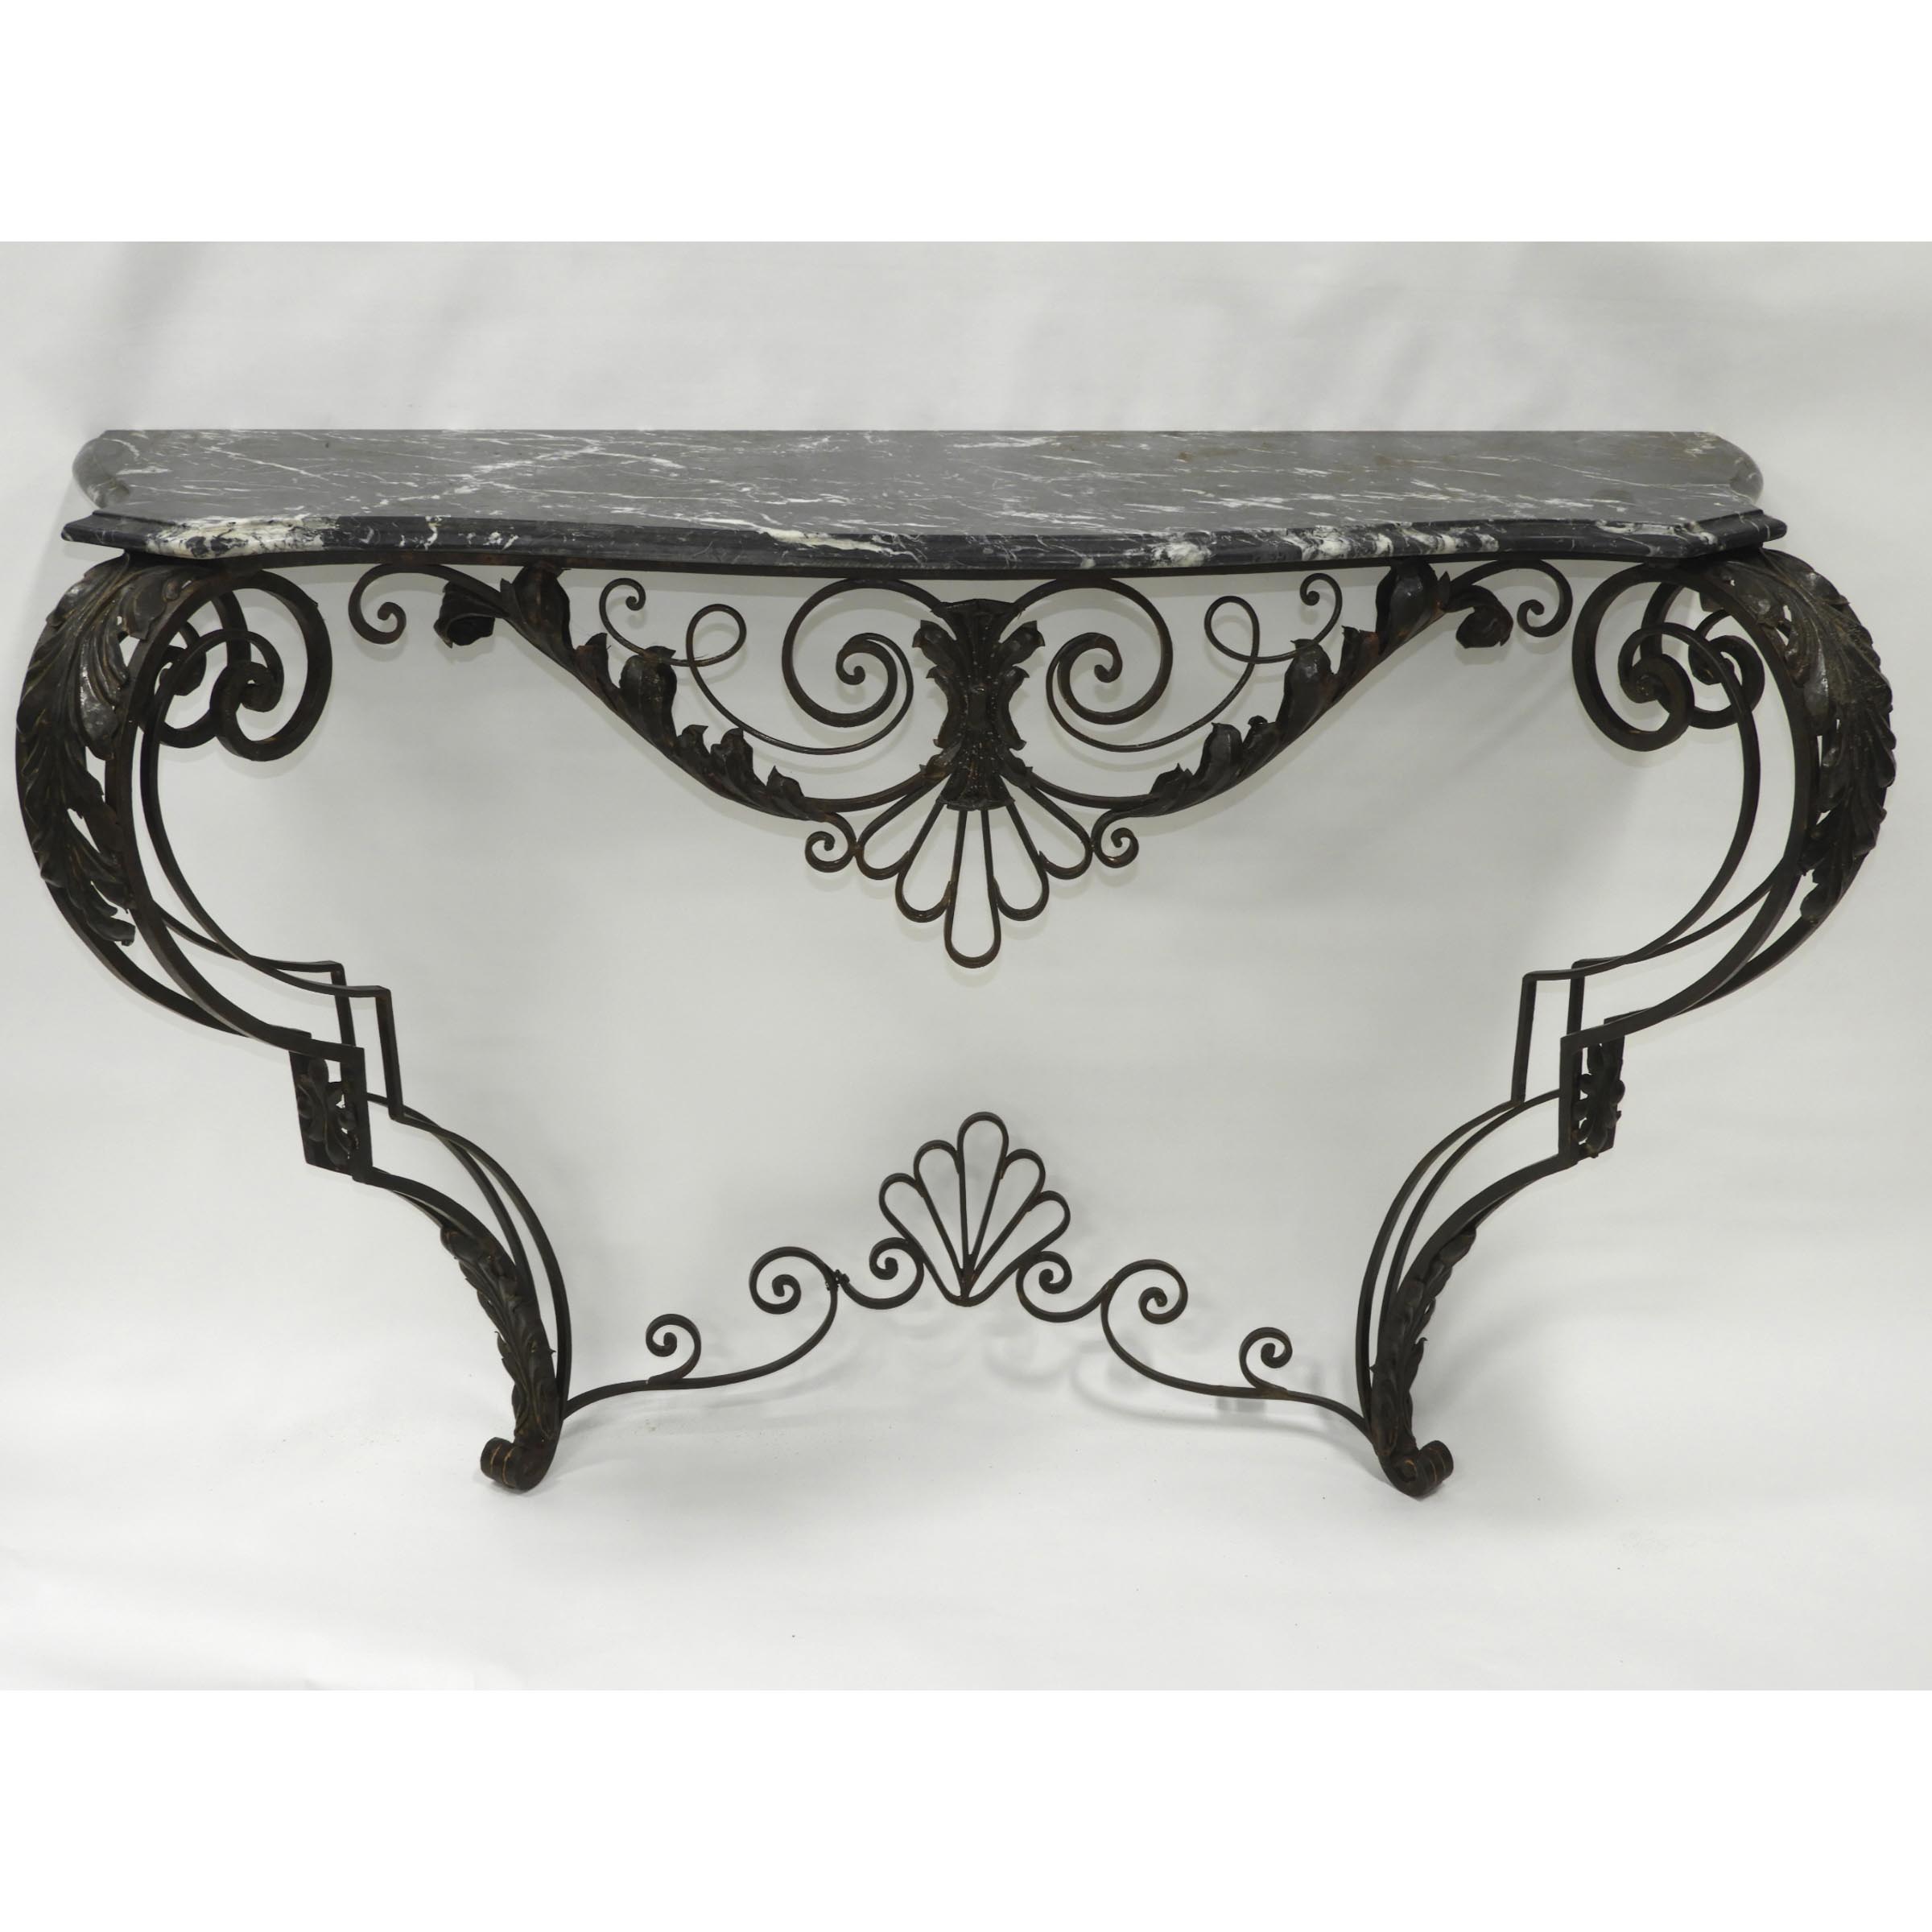 Spanish Wrought Iron Console Table, early 20th century